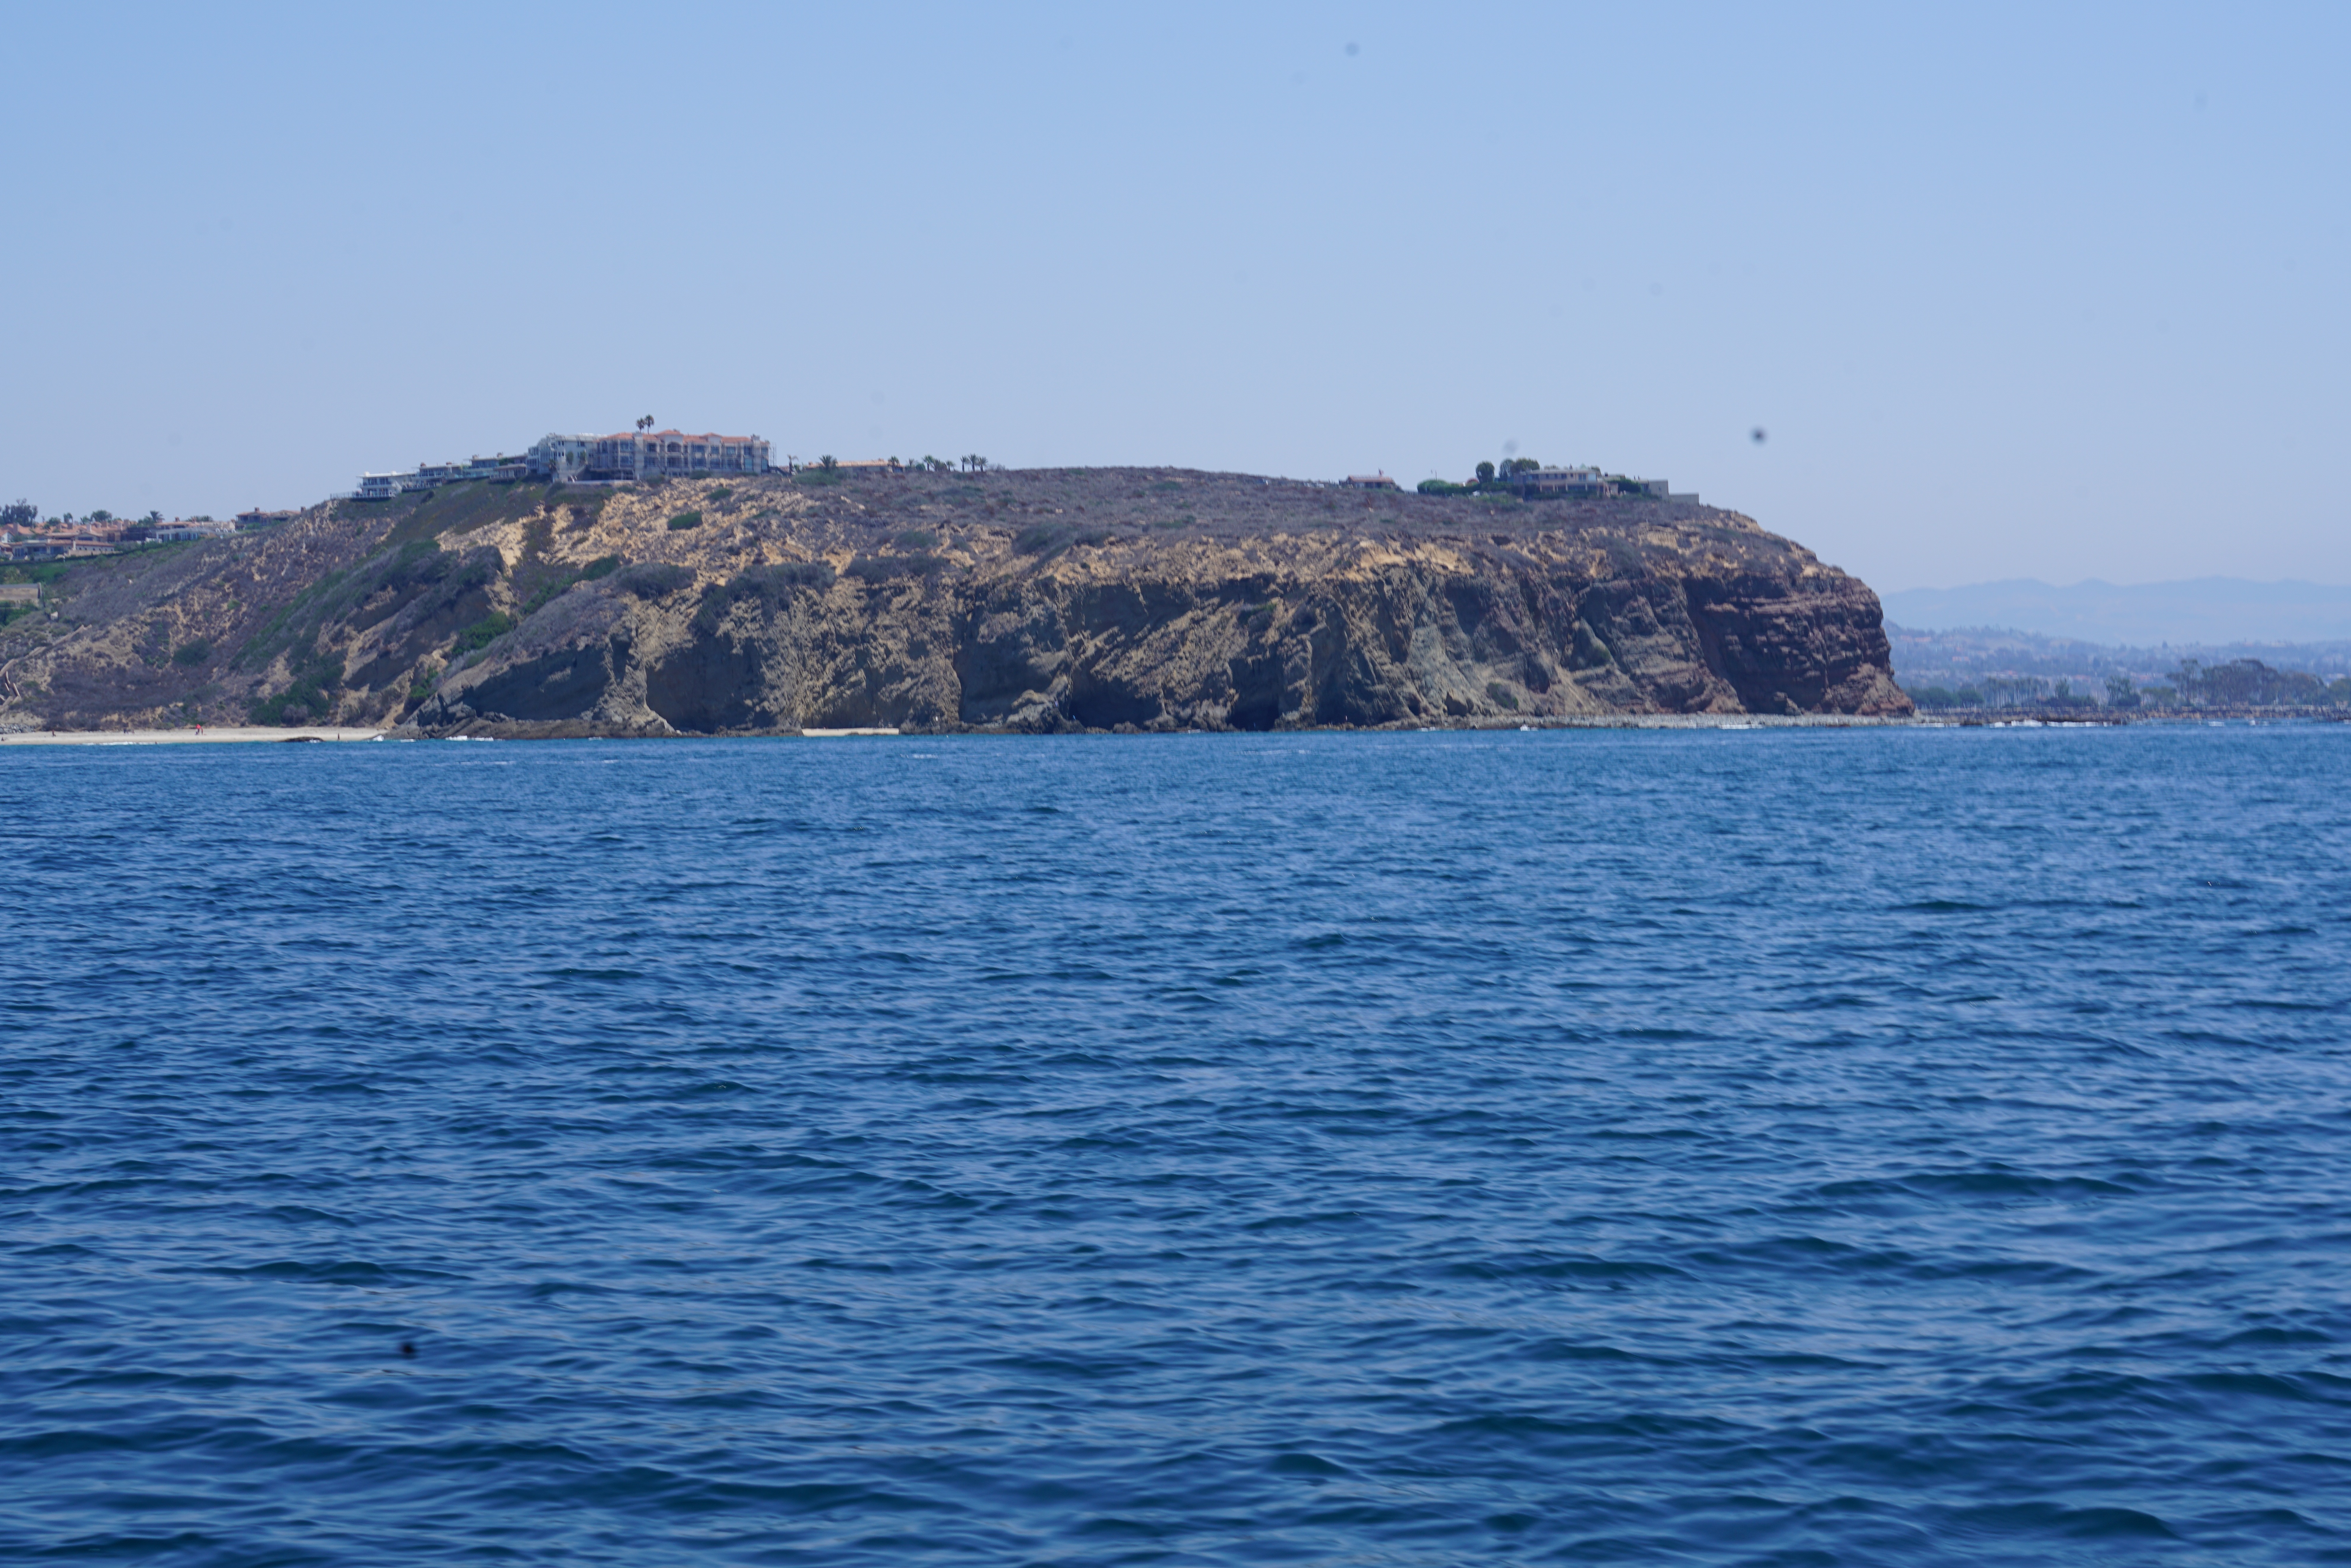 Approaching Dana Point from the north